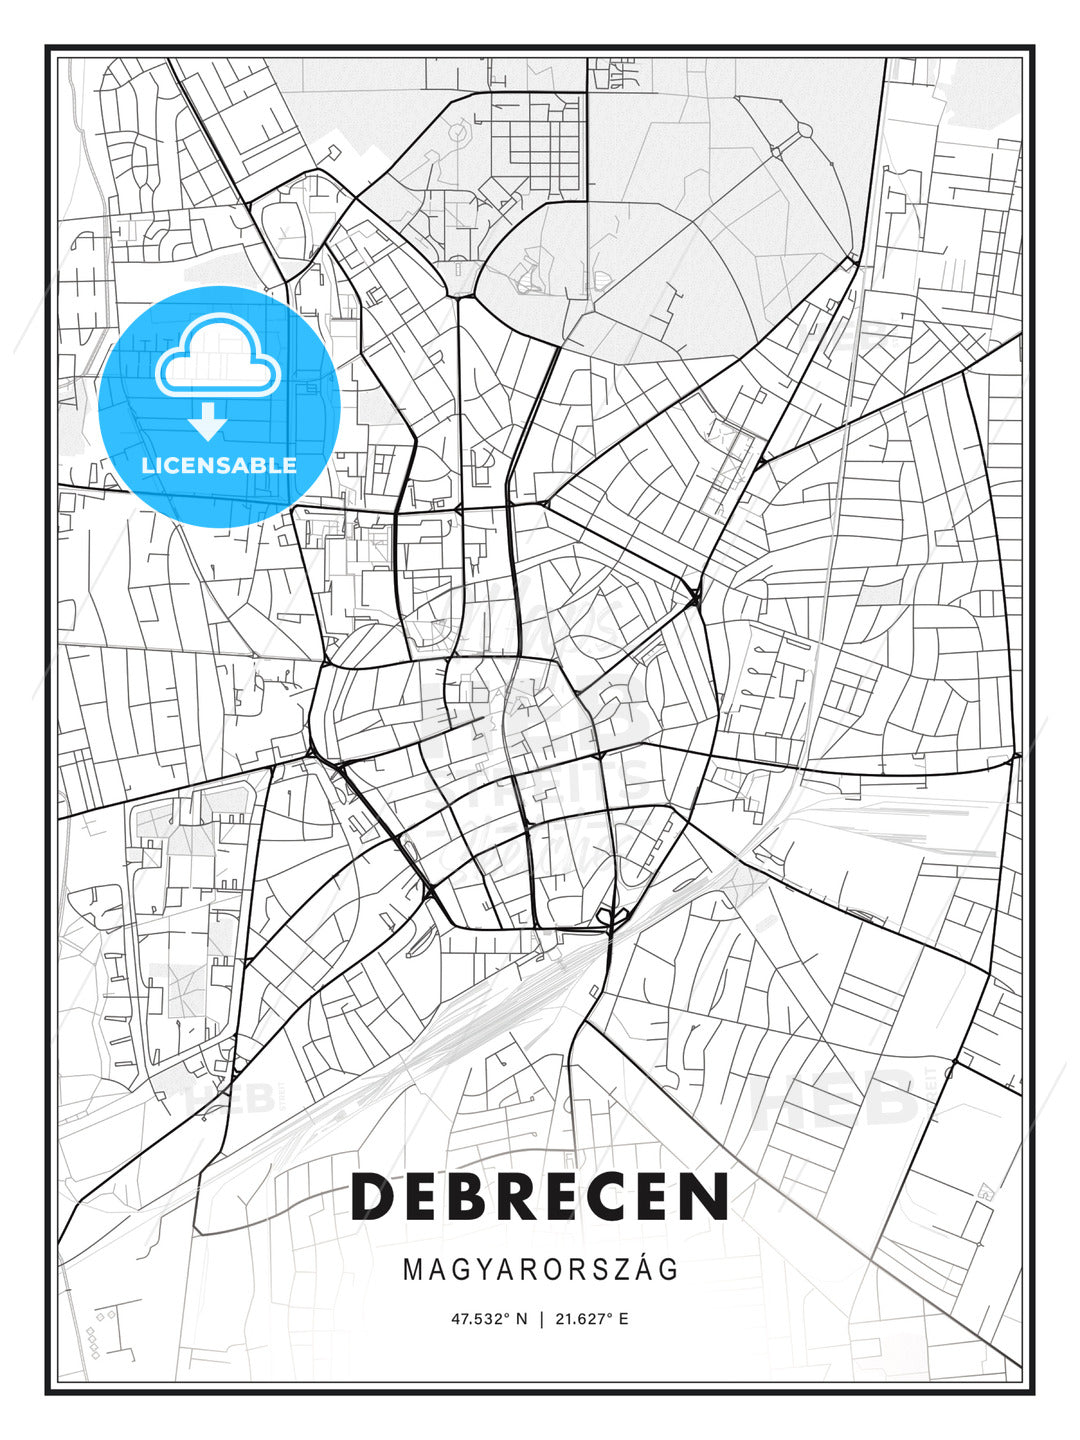 Debrecen, Hungary, Modern Print Template in Various Formats - HEBSTREITS Sketches